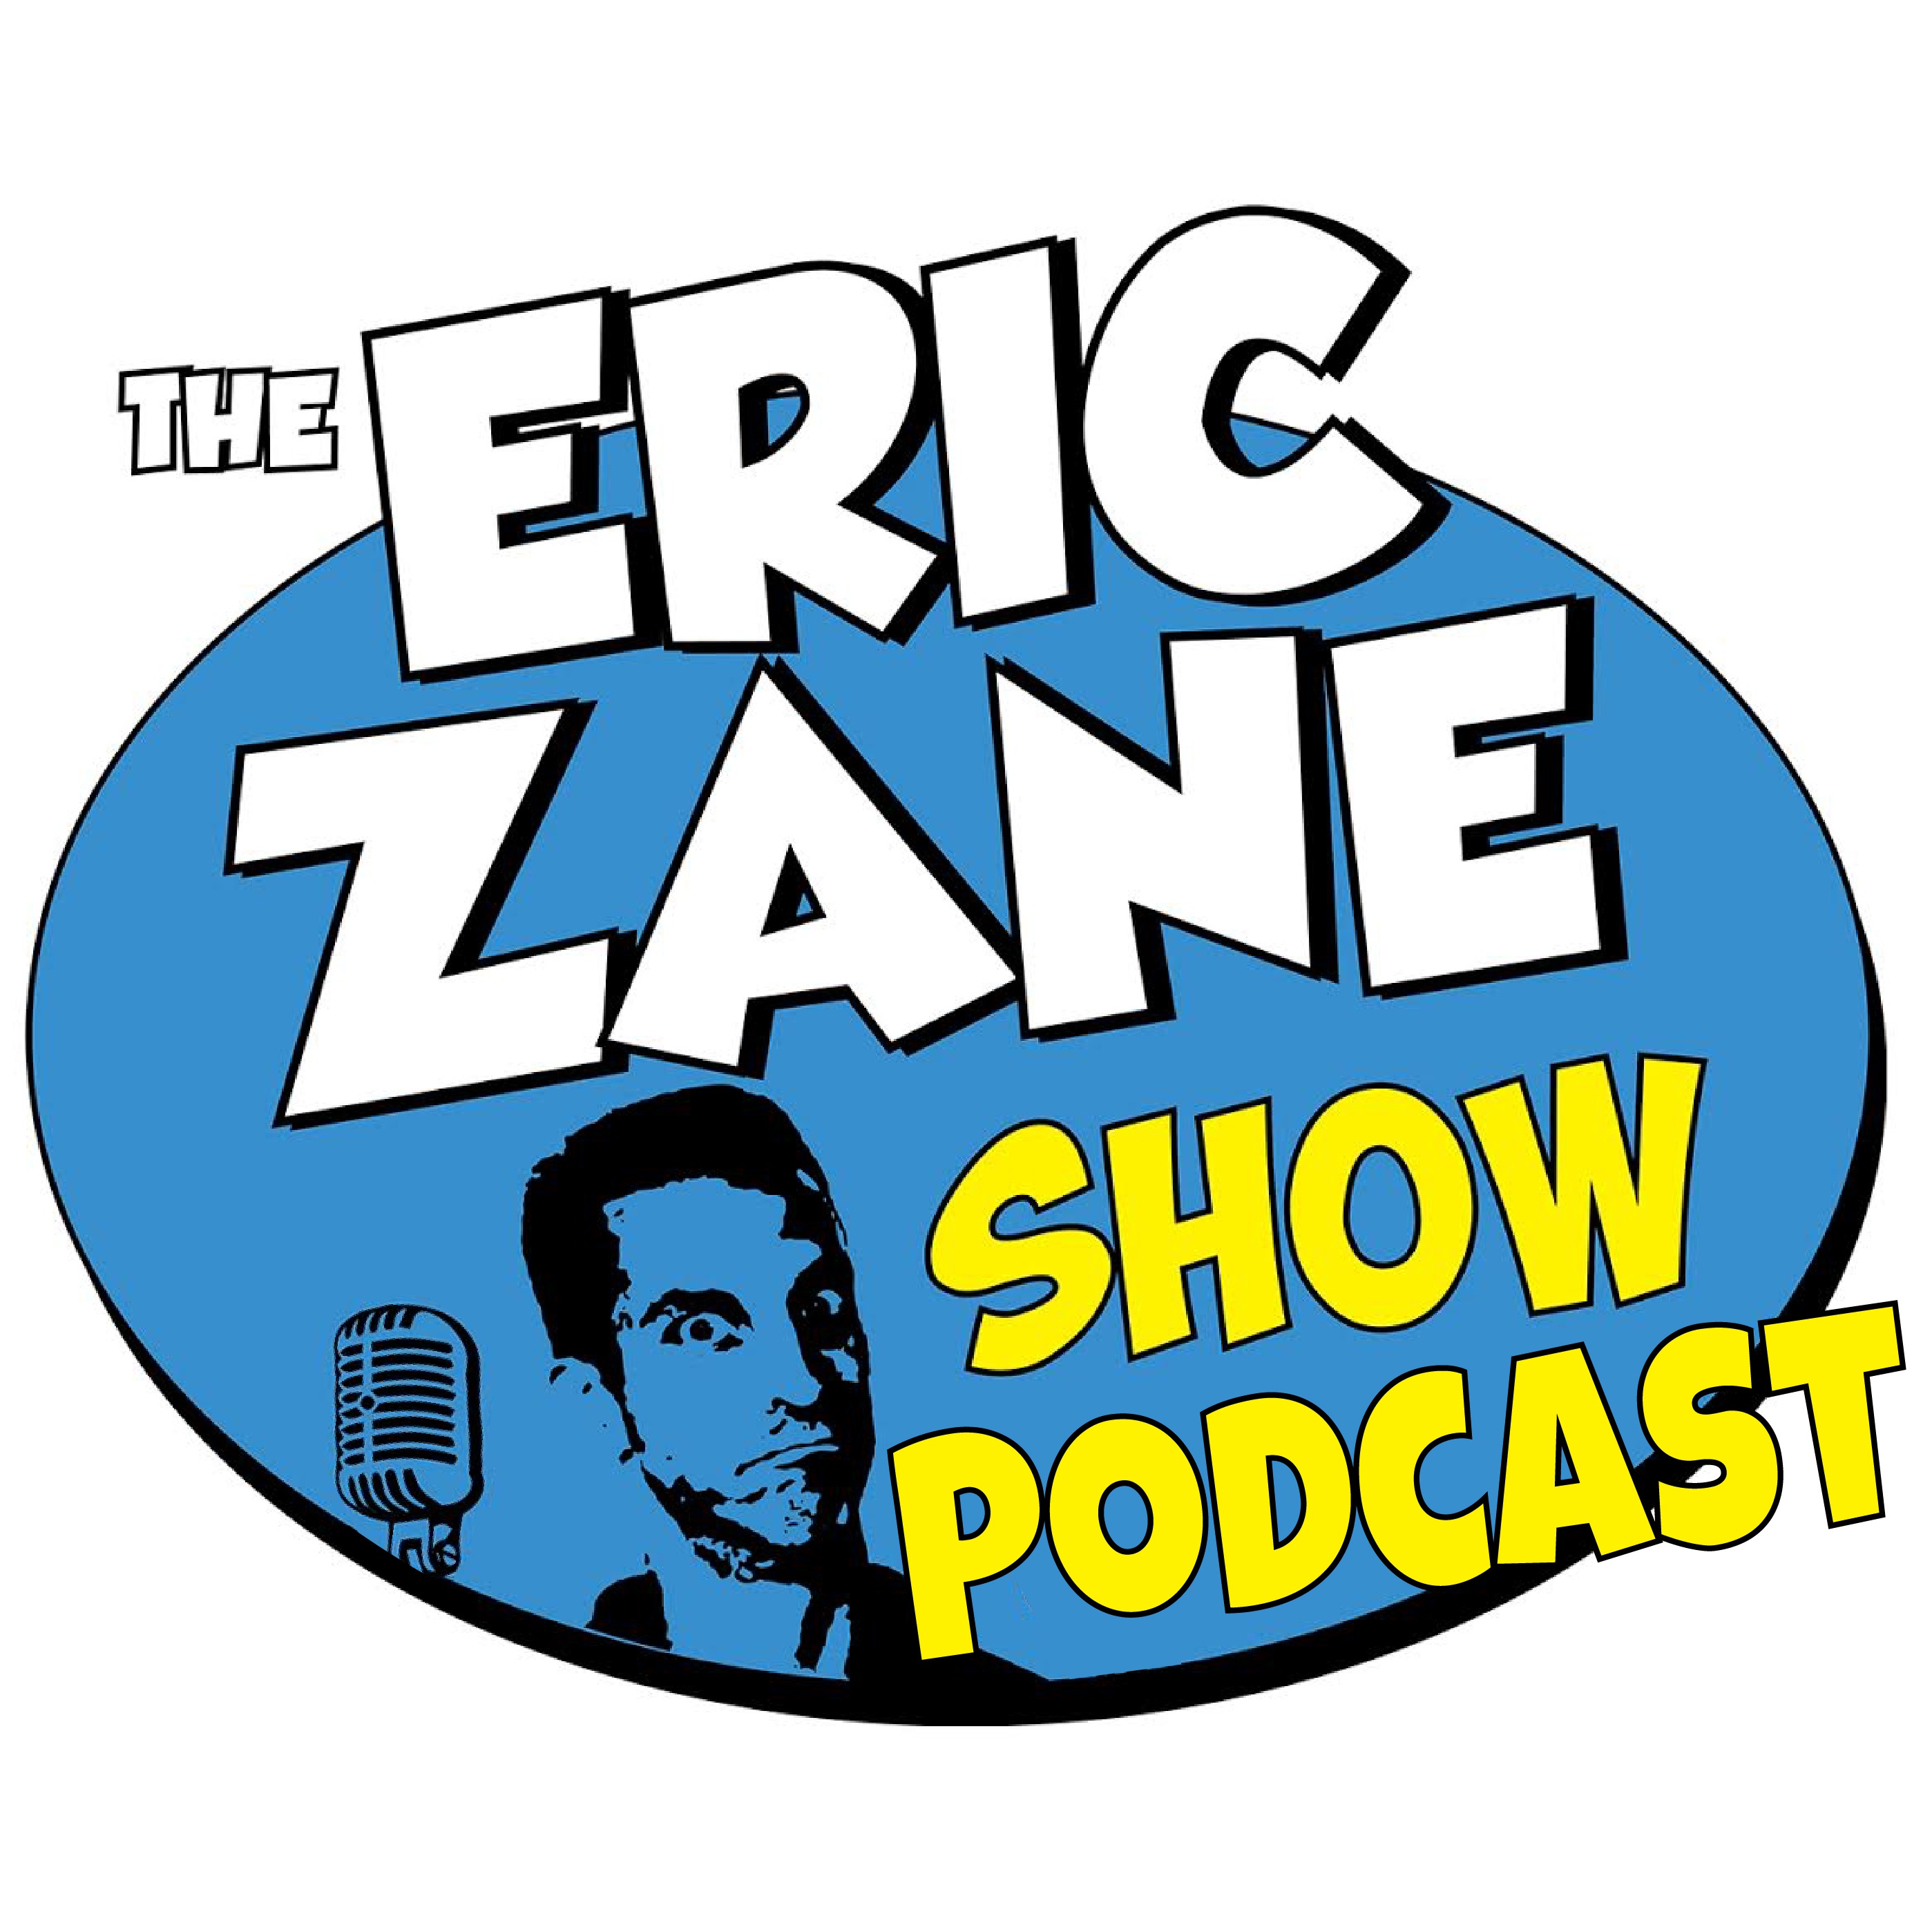 Eric Zane Show Podcast 979 - EZ's ongoing anxiety attack!